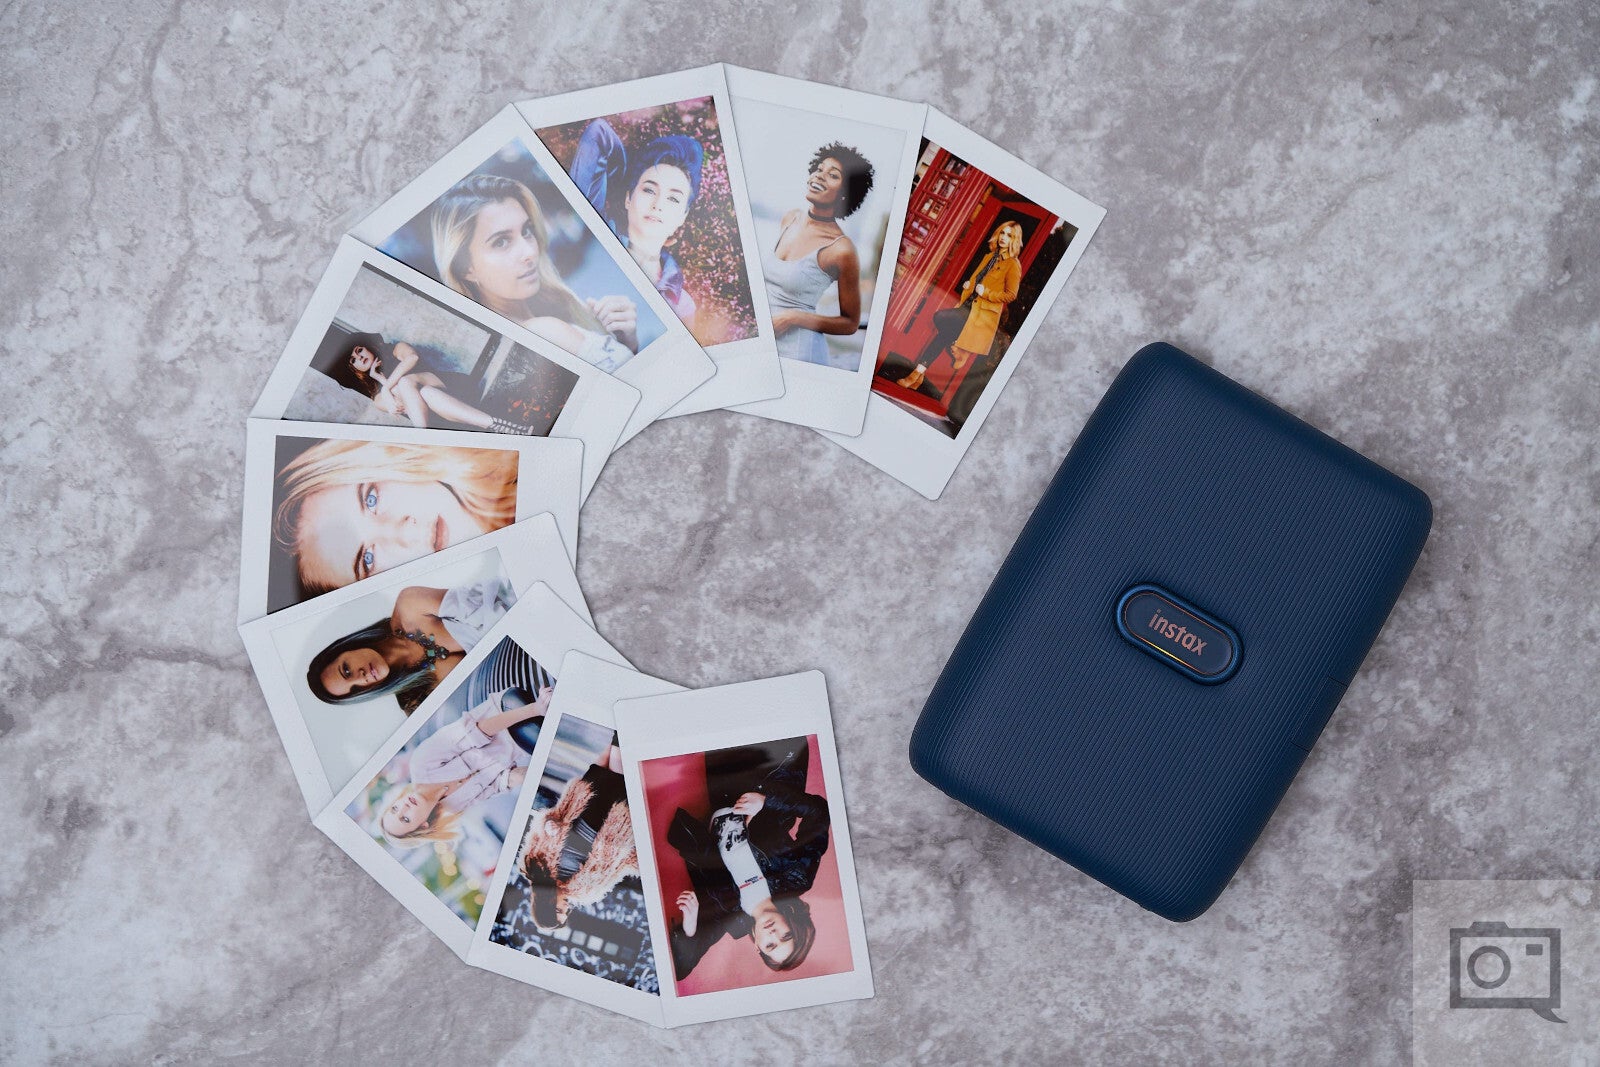 Fujifilm Instax Mini Link Smartphone Printer - Best portable photo printers for iPhone and Android phones